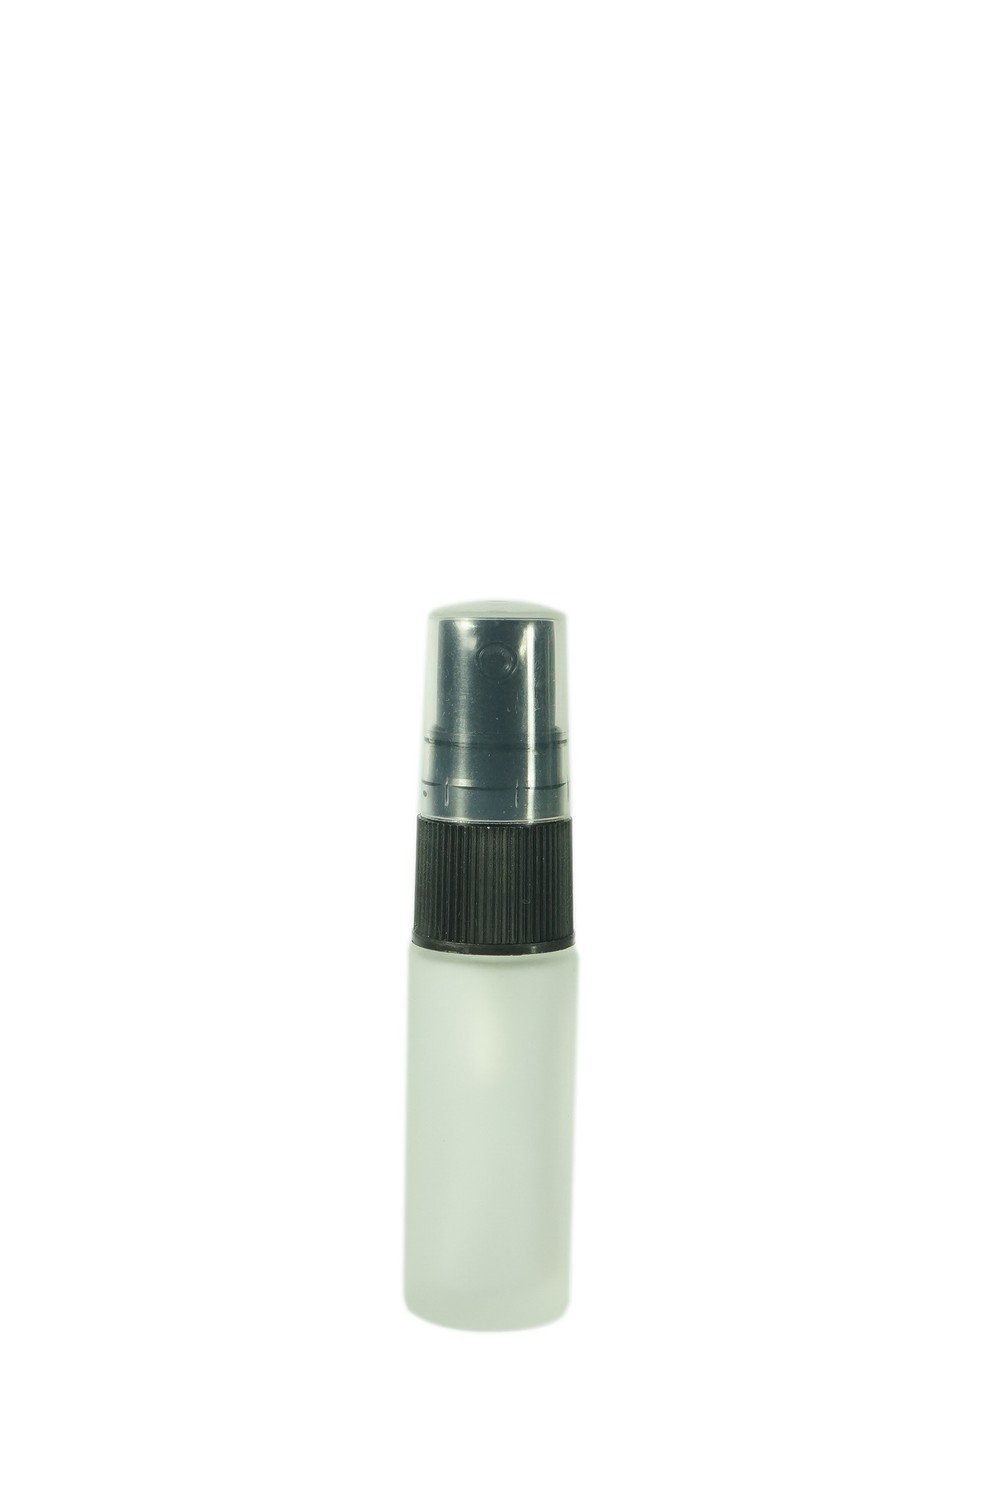 10ml Glass Cylindrical Frosted Bottle (plastic spray)